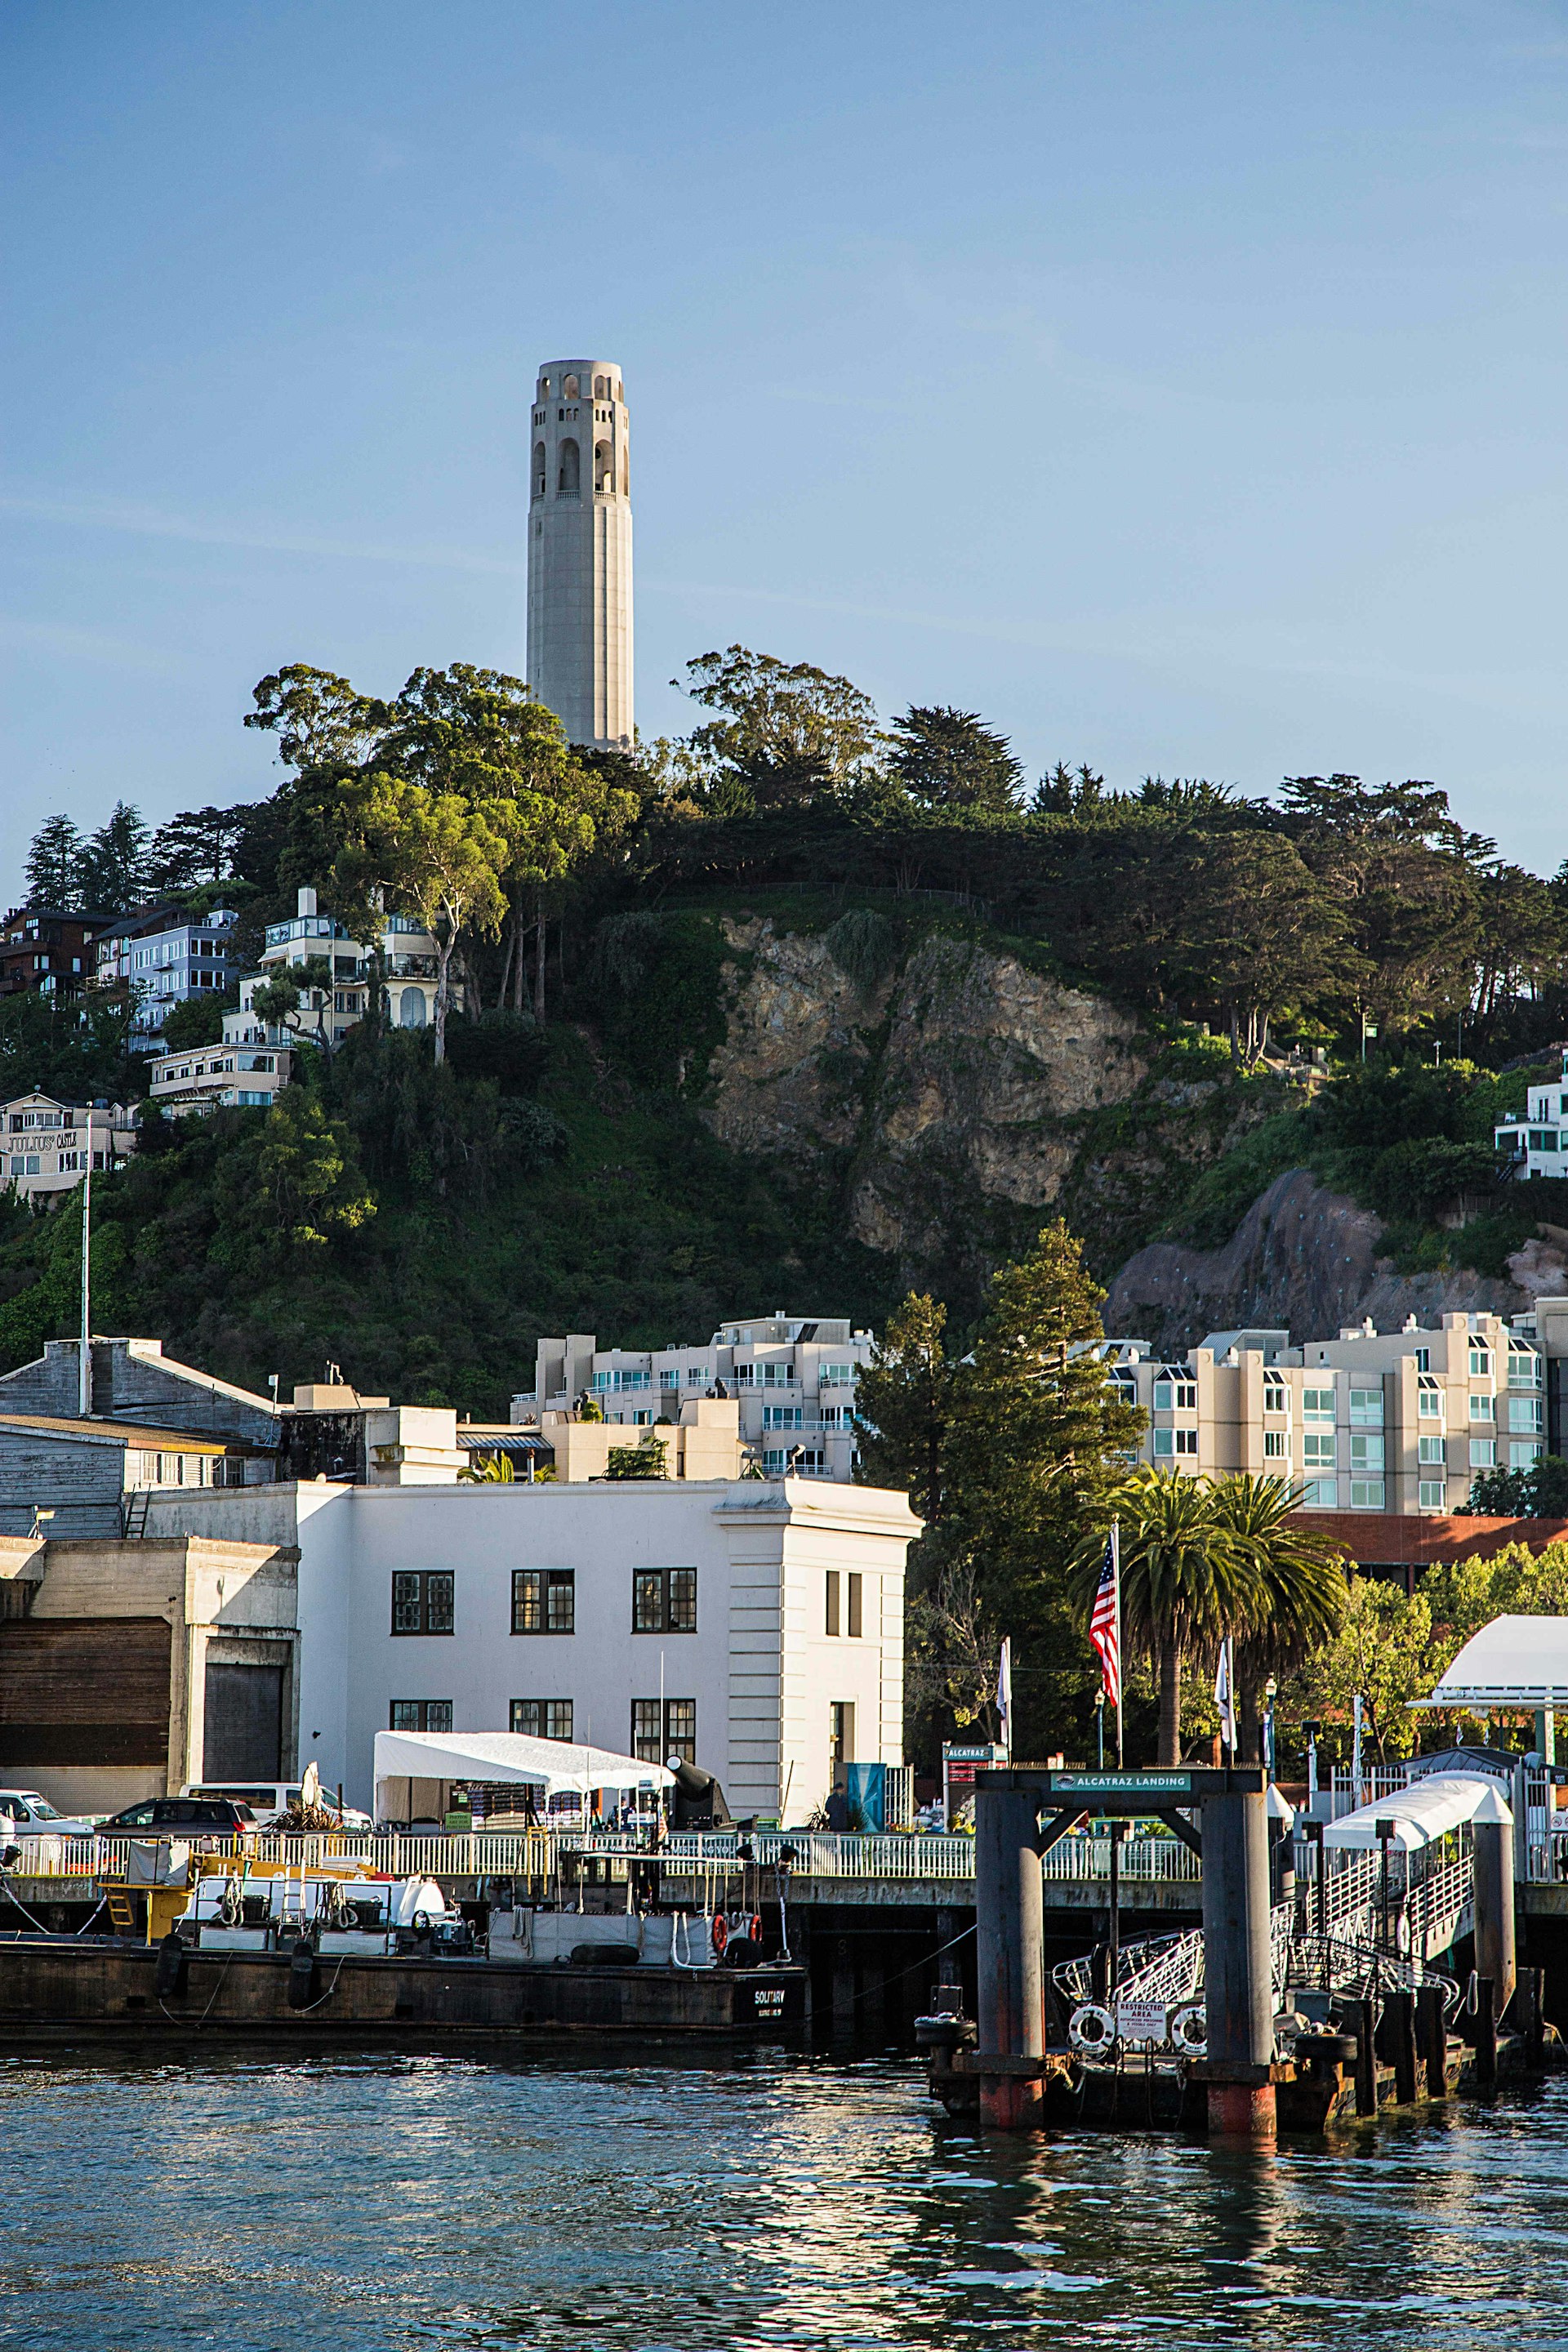 Coit Tower, with its hilltop position, has appeared in the background of several SF movies © Alexander Howard / Lonely Planet